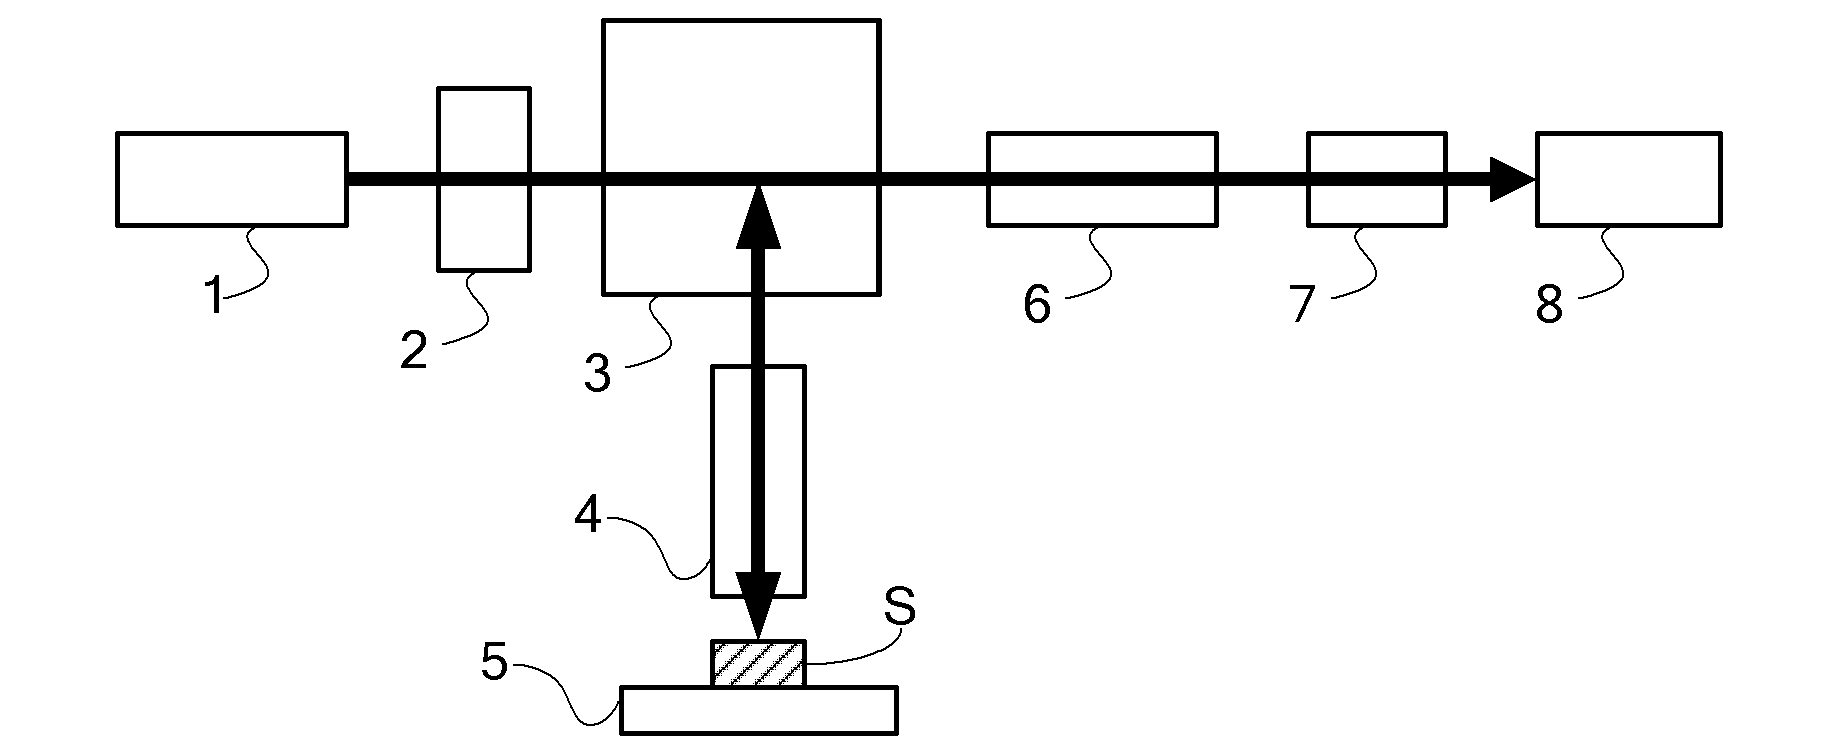 Semiconductor material micro-area stress test system